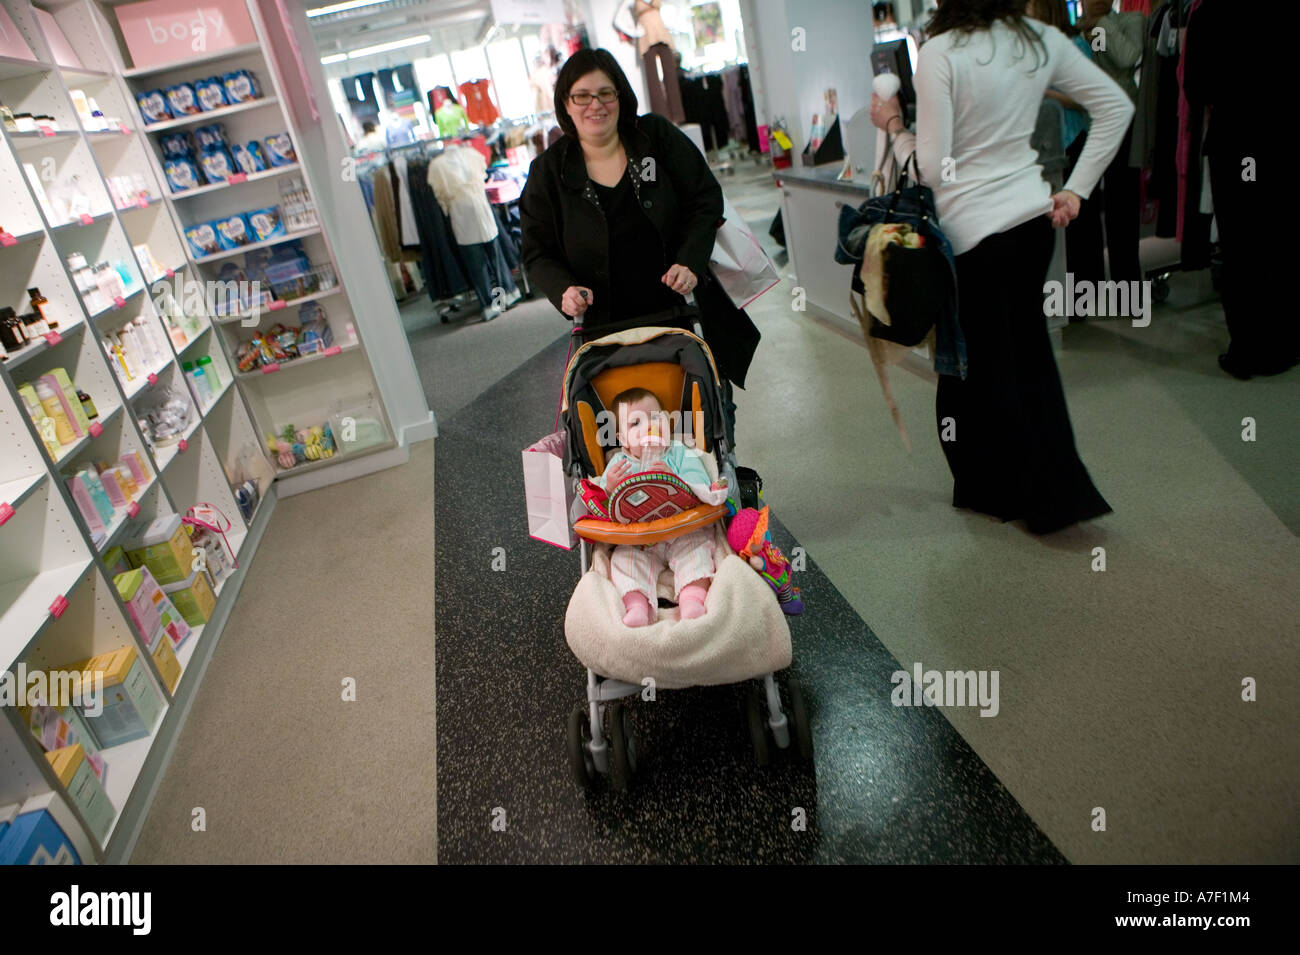 Woman shoping with baby for clothes at the Destination Maternity store New York City USA March 2006 EDITORIAL USE ONLY Stock Photo